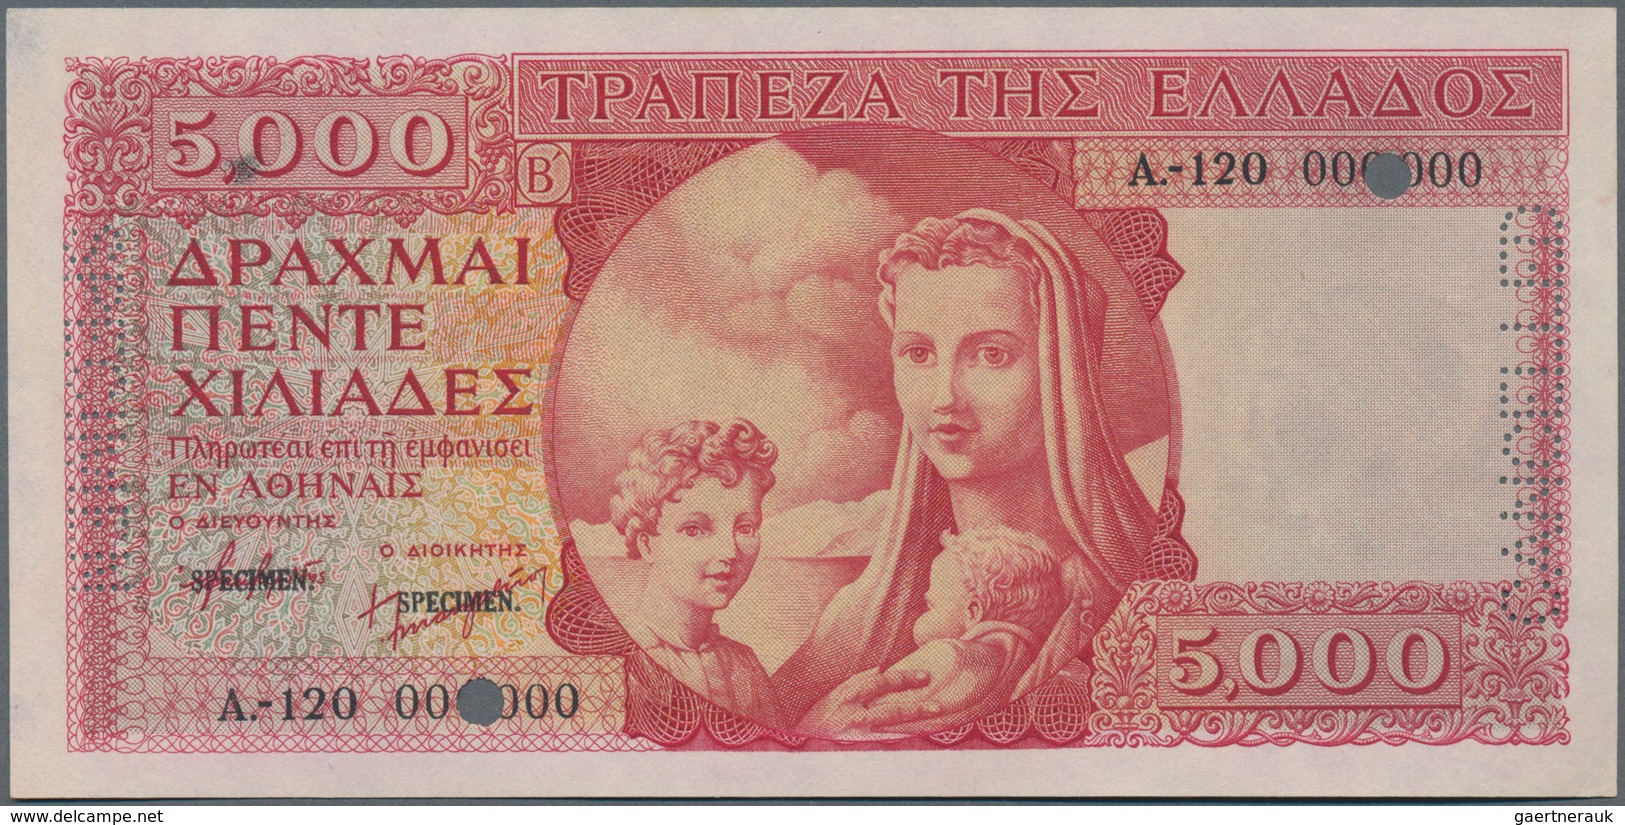 Greece / Griechenland: 5000 Drachmai ND(1945) SPECIMEN, P.173s With Serial Number A-120 000000, Blac - Griechenland